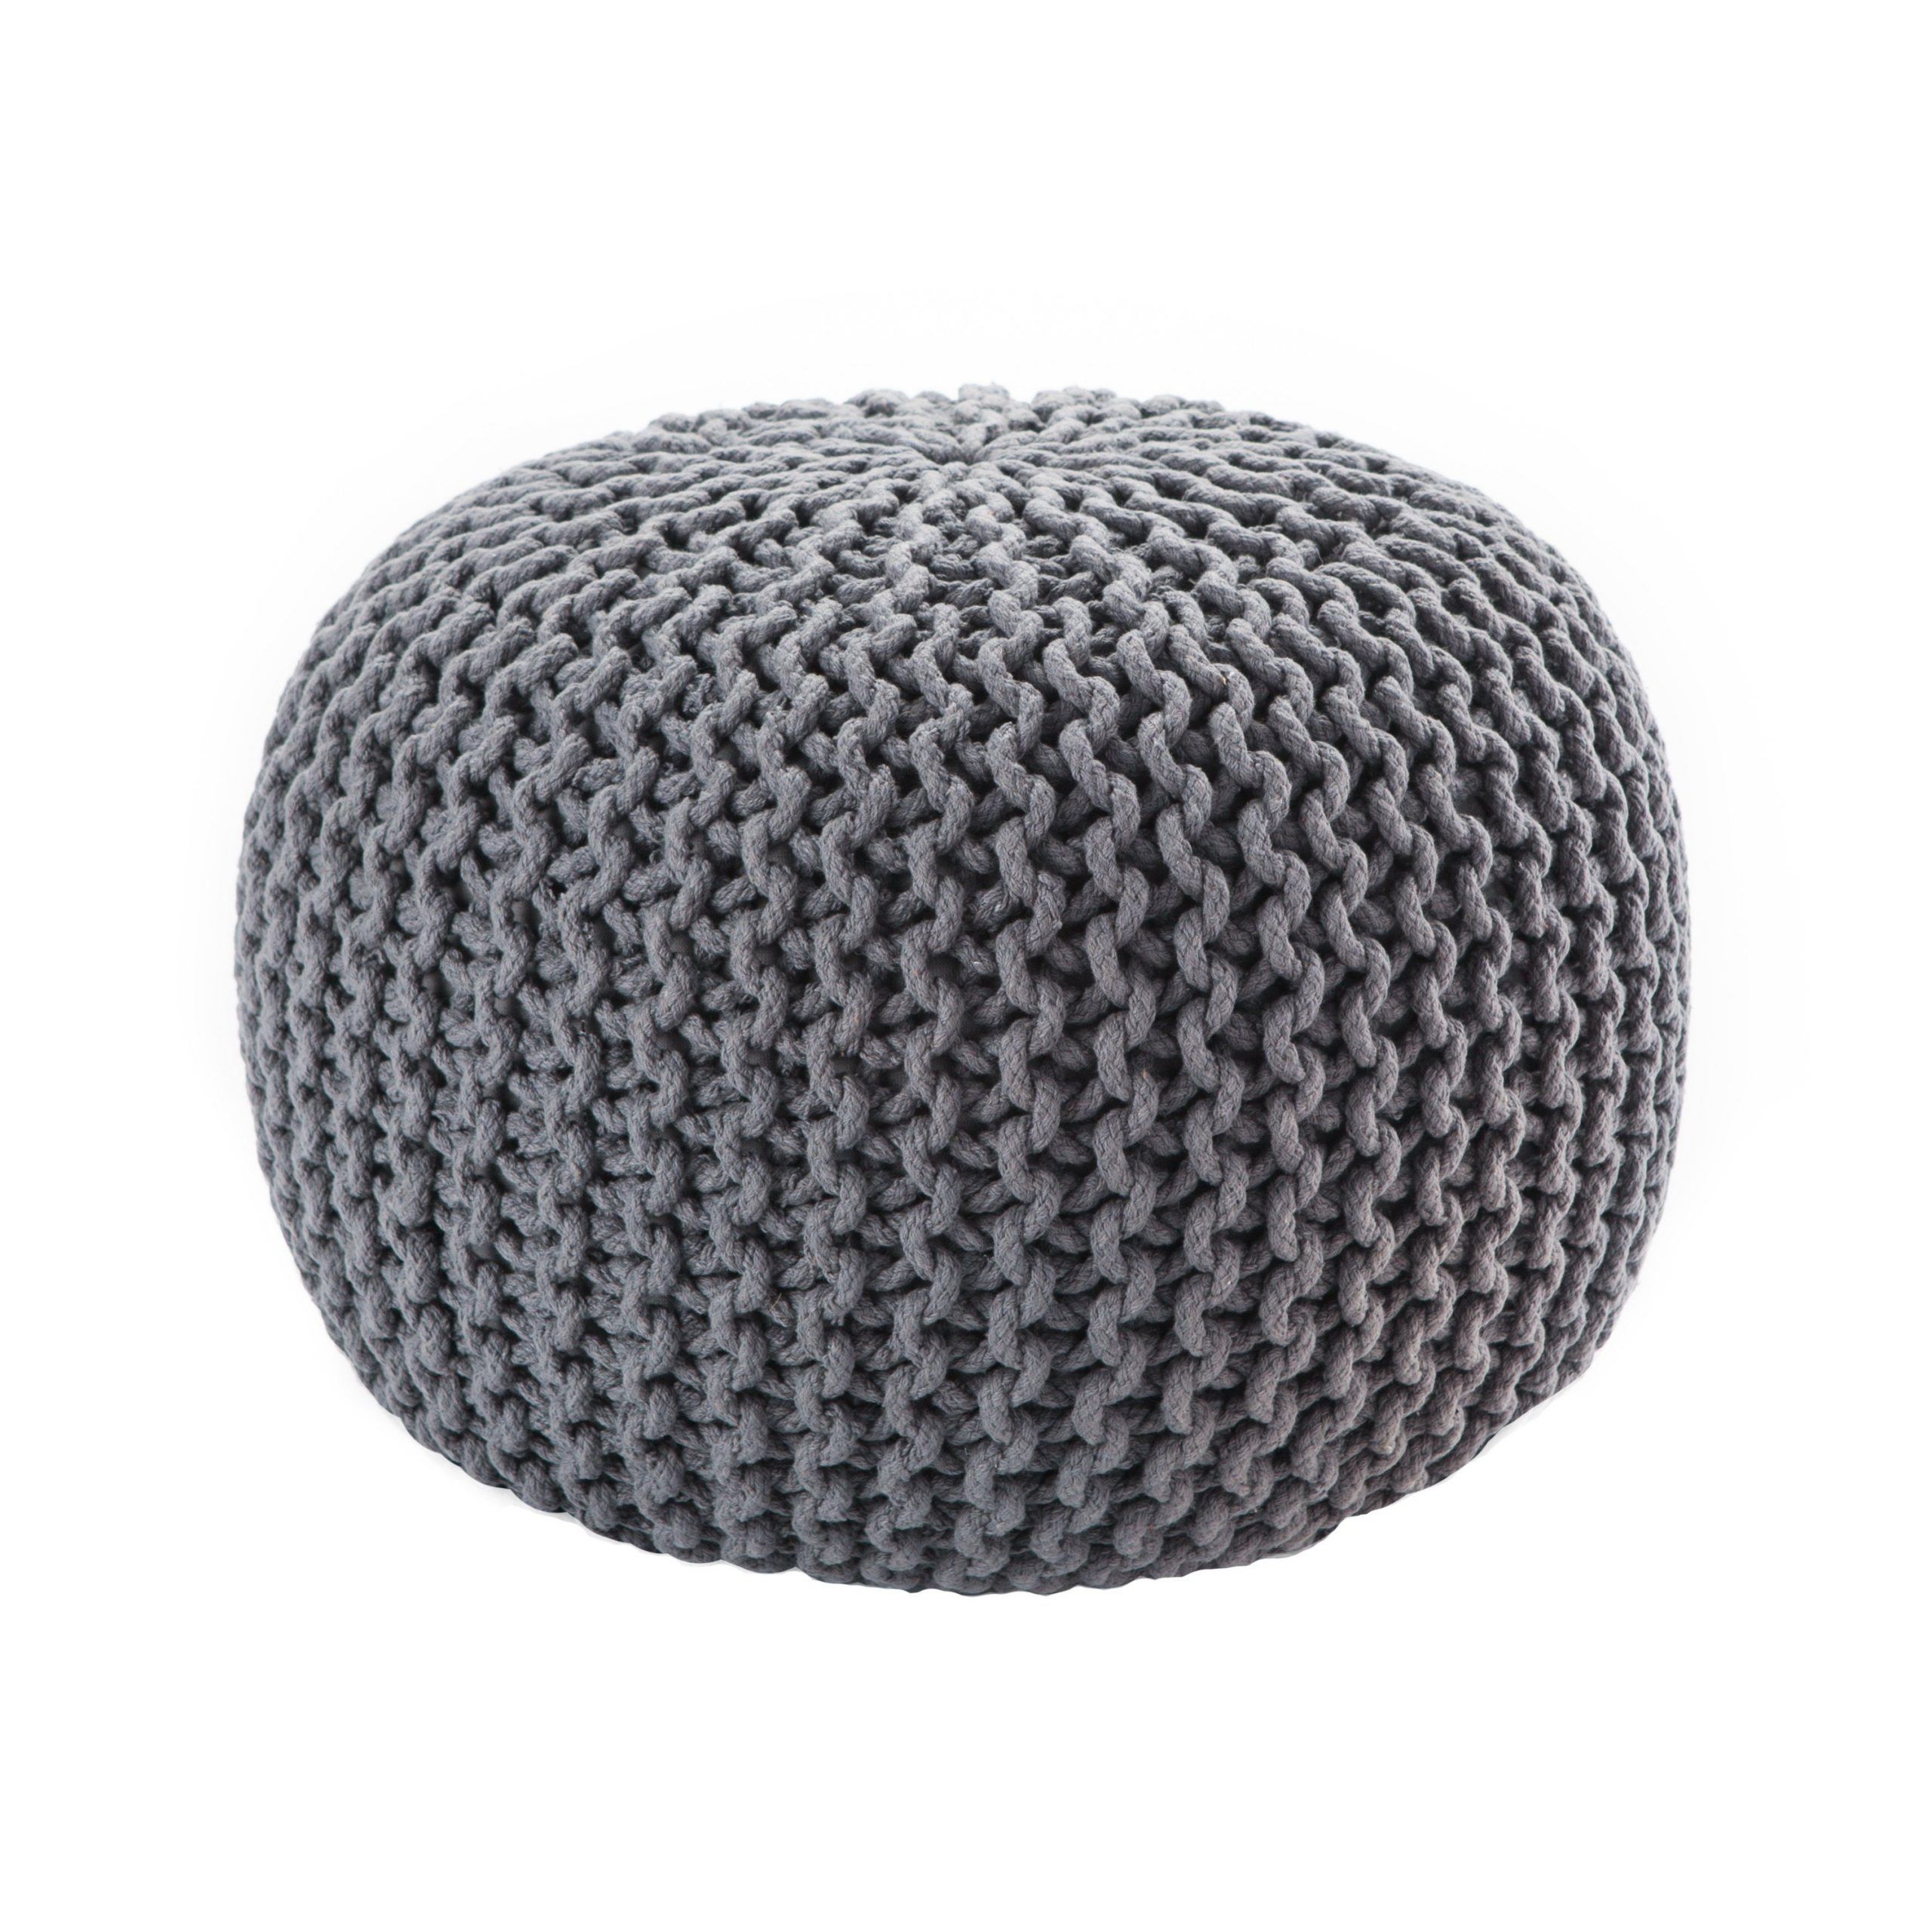 2019 Visby Gray Textured Round Pouf (View 8 of 10)